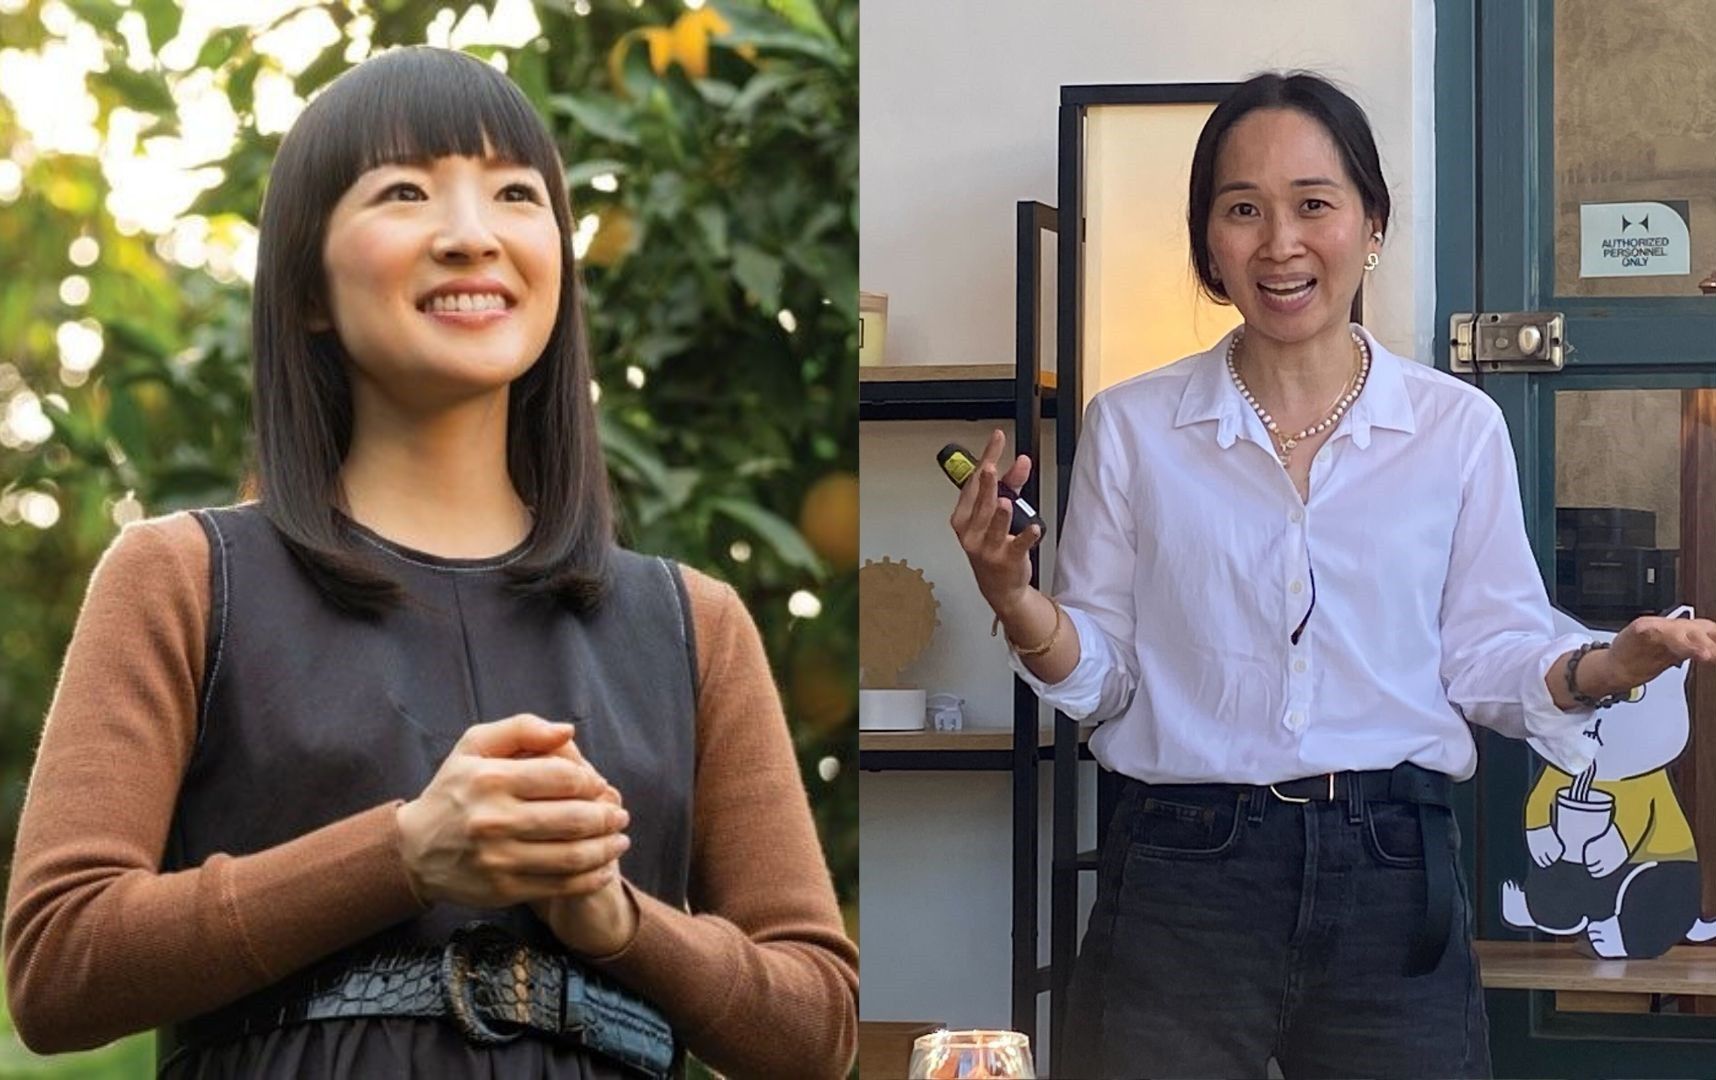 'Live a life that sparks joy': Konmari consultant explains Marie Kondo's 'giving up on tidiness' comment